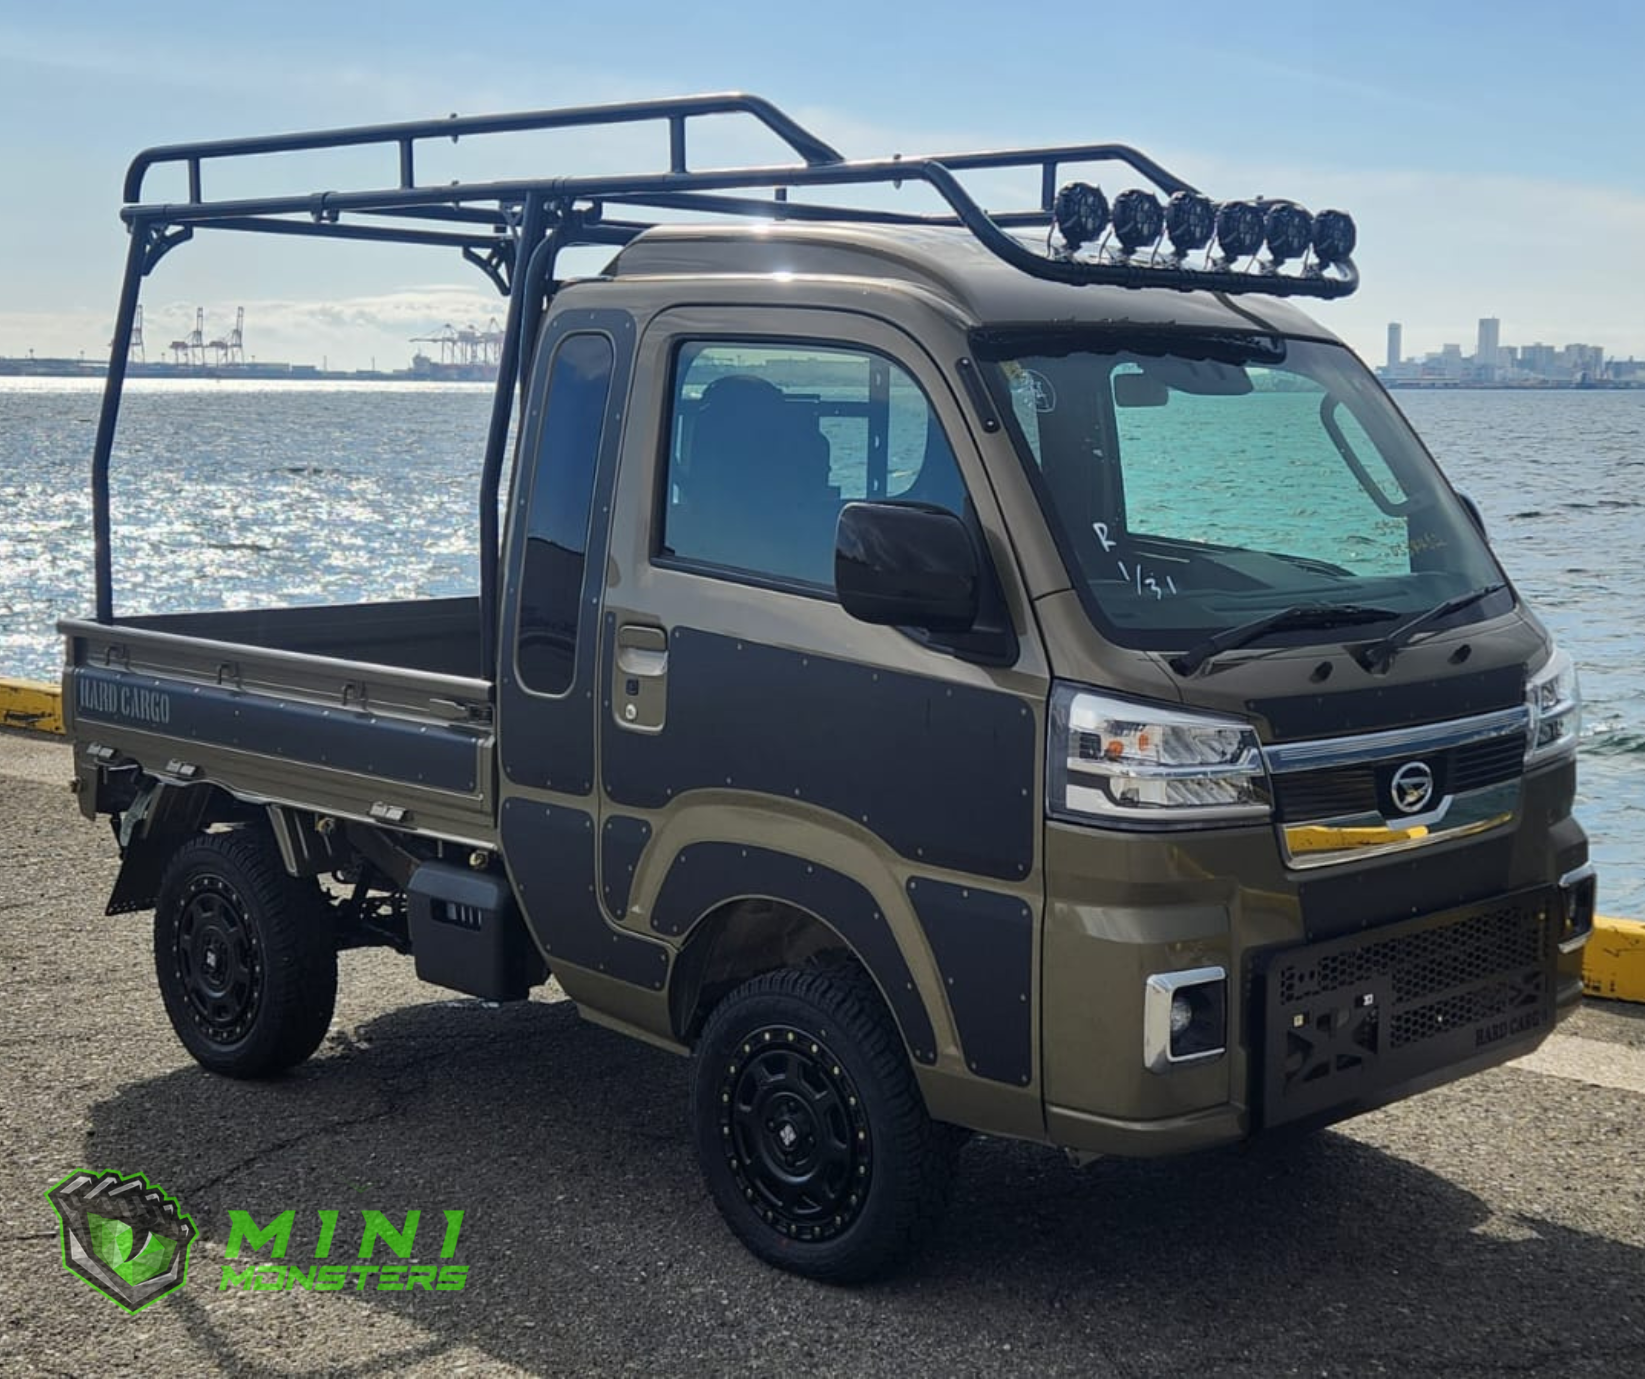 Top 10 Reasons to Choose a Japanese Mini Truck